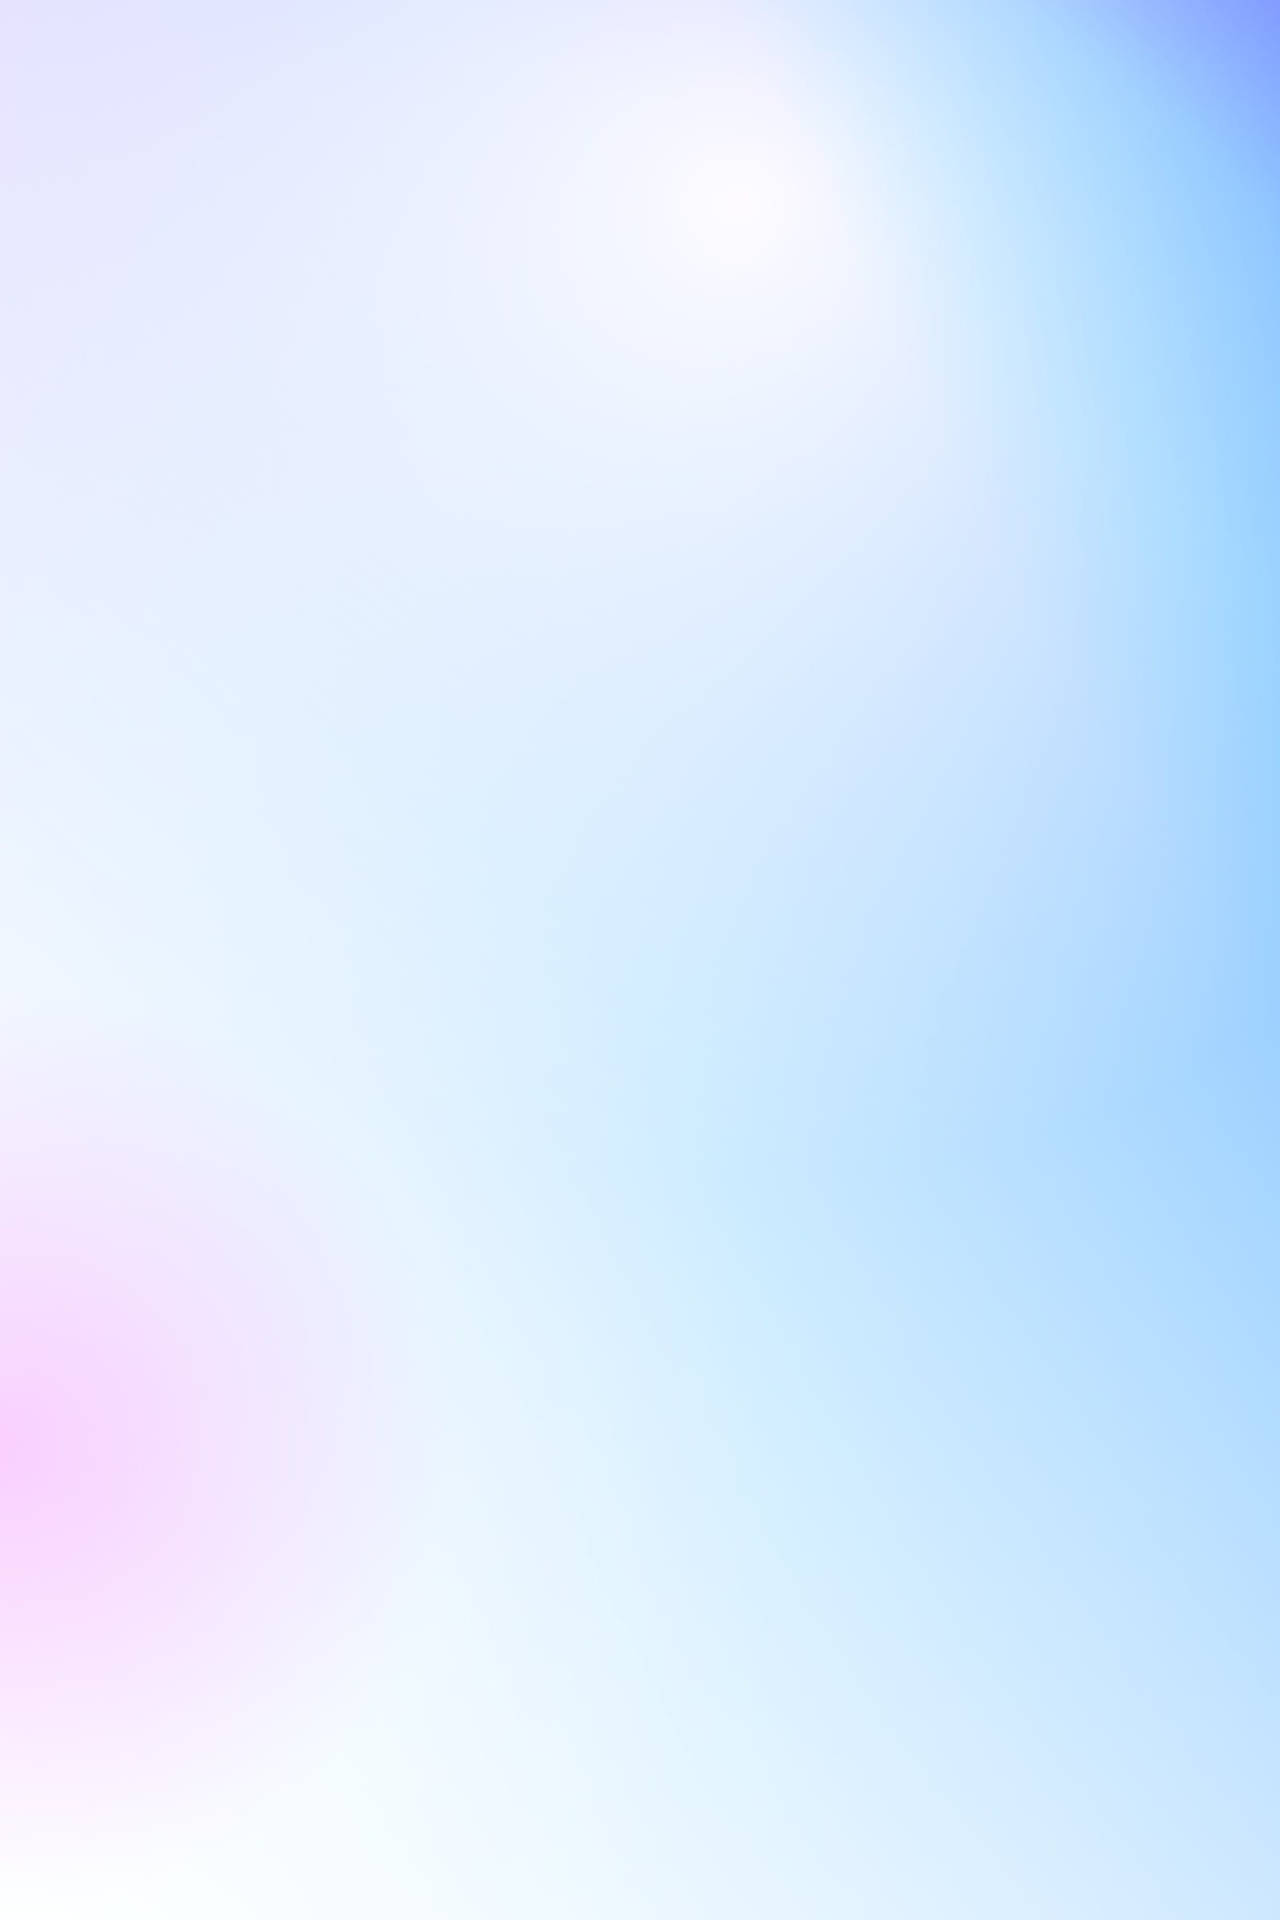 Pastel Phone Pink And Blue Gradient Picture